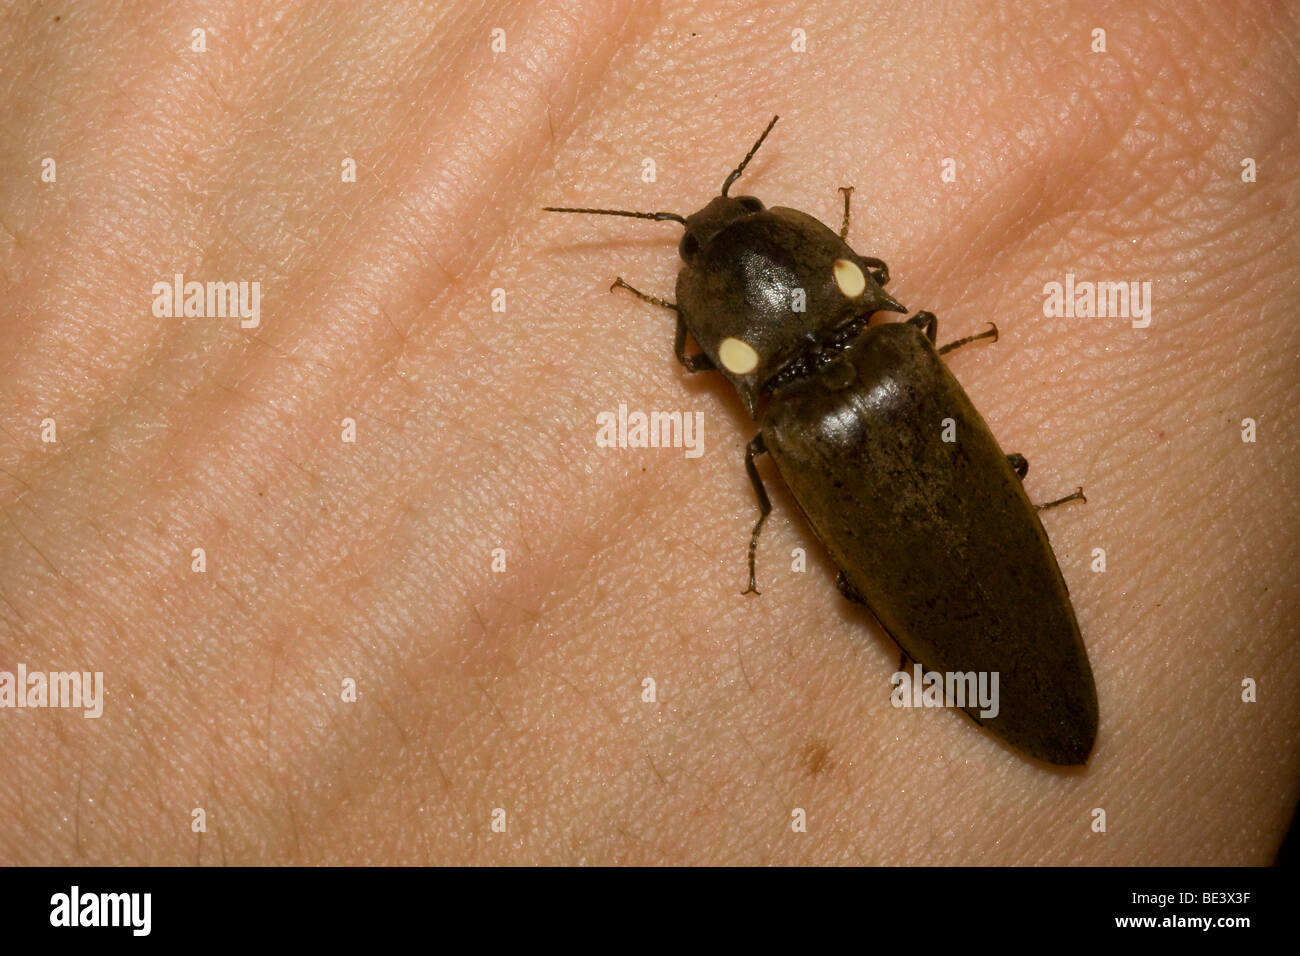 Fire beetle, Pyrophorus sp., an extremely bright bioluminescent click beetle. Photographed in Costa Rica. Stock Photo